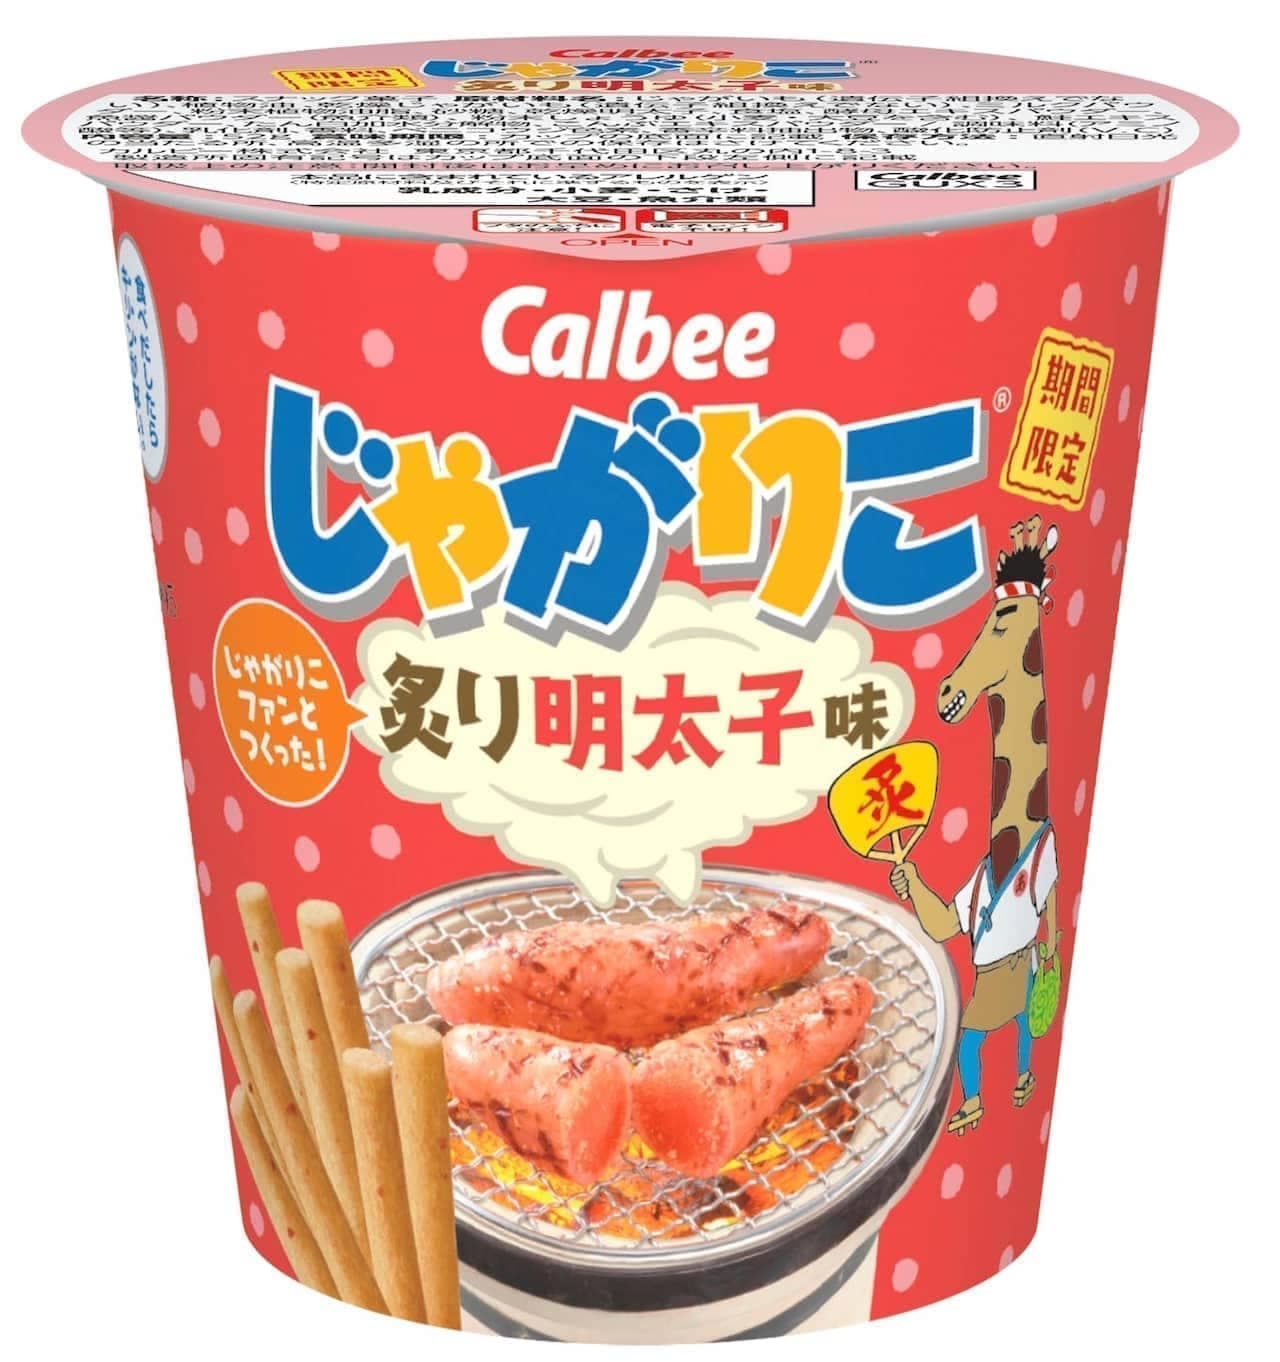 "Jagarico roe mentaiko flavor" for a limited time